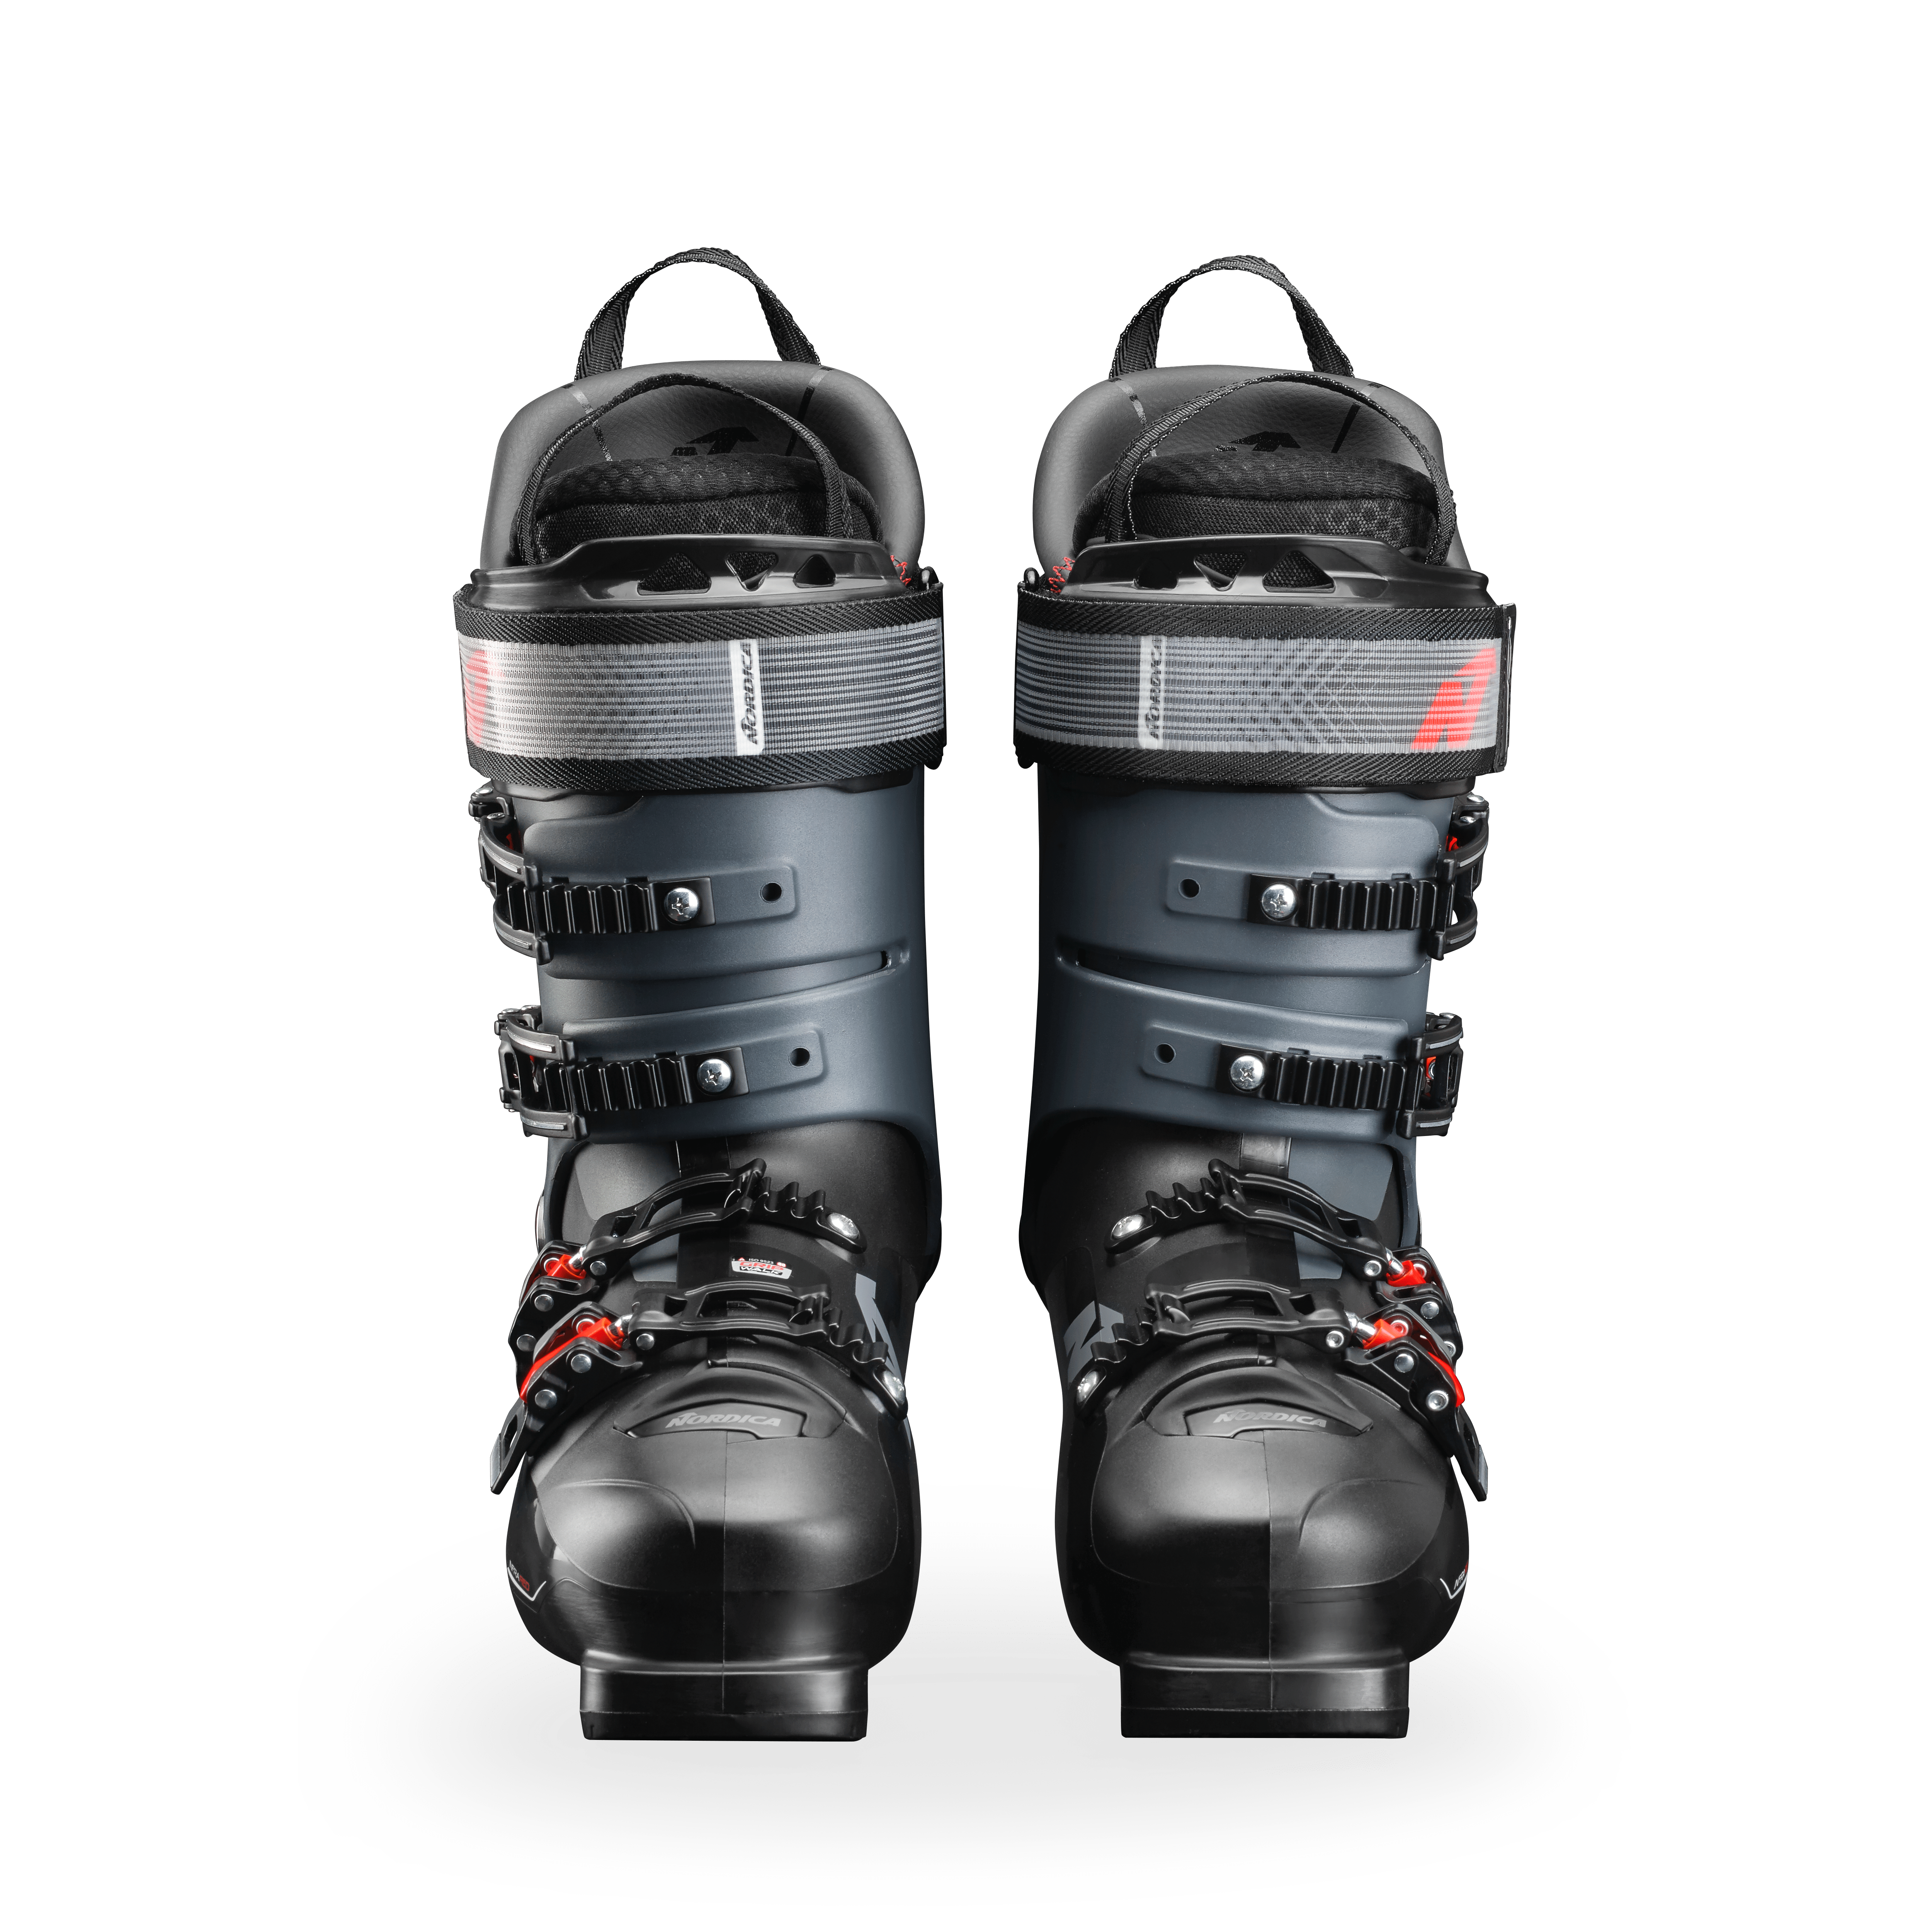 PRO MACHINE 130 (GW) Nordica - Skis and Boots – Official website